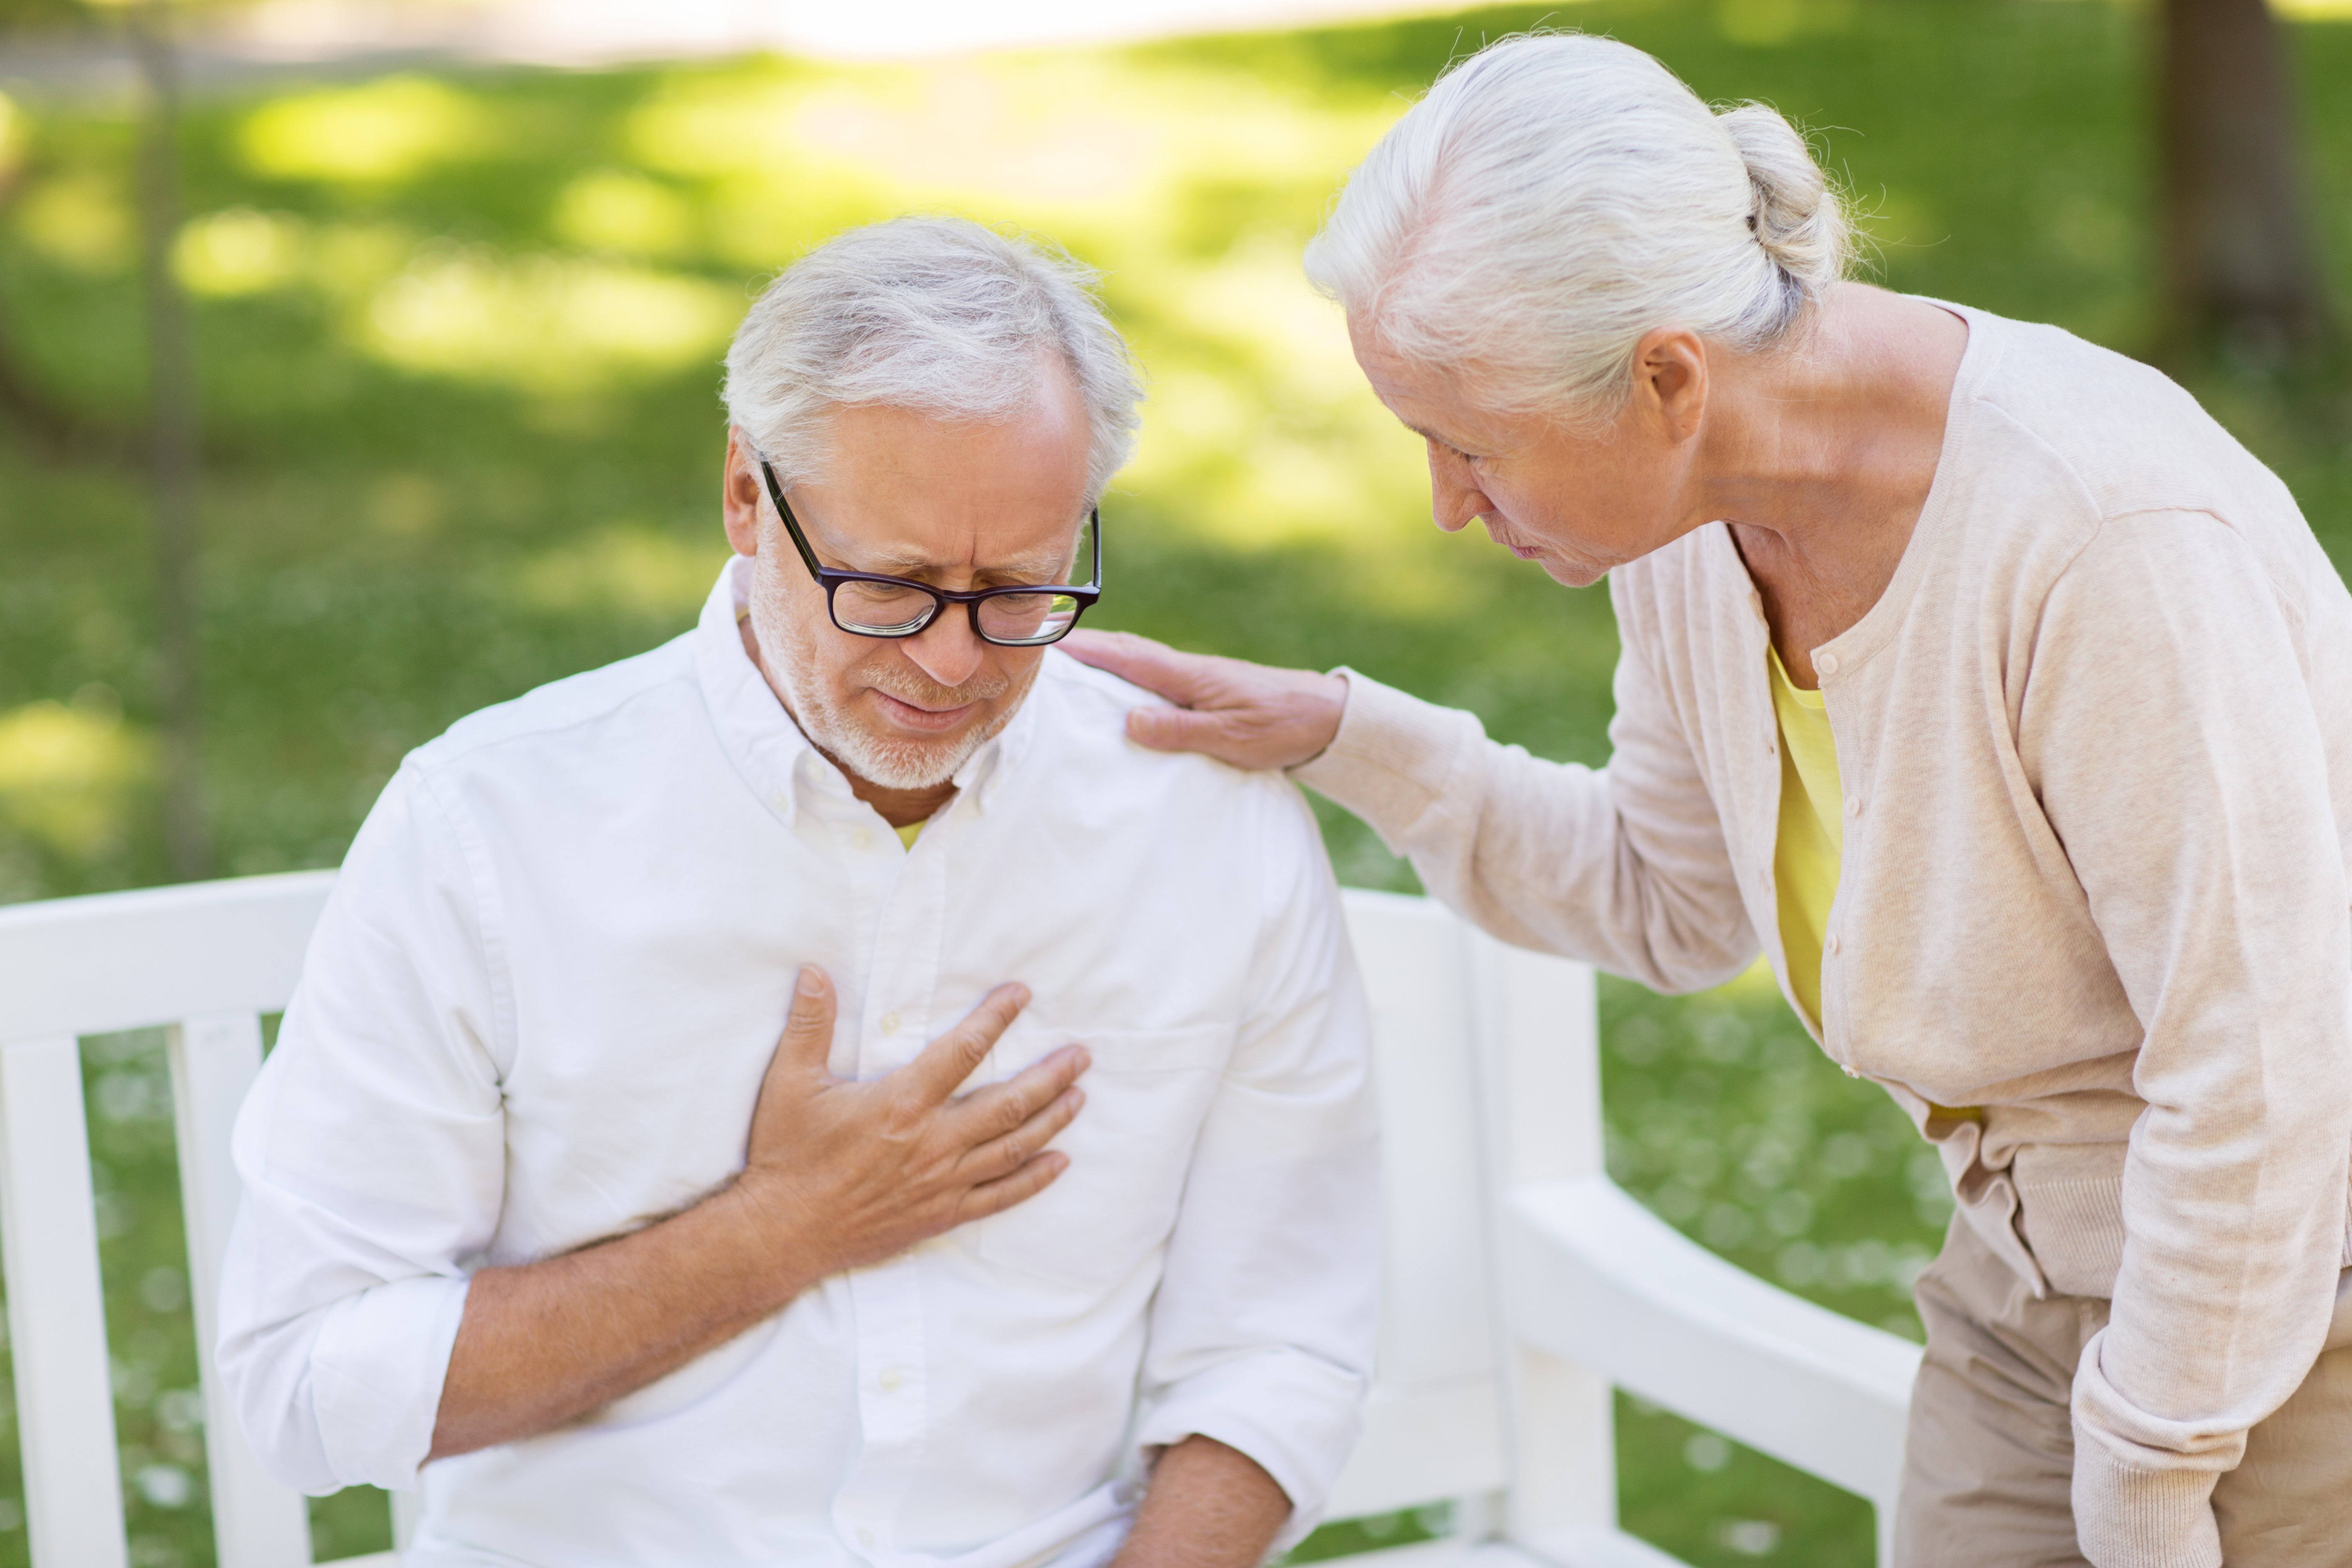 Who Can Benefit from a Cardiac Rehab Program?